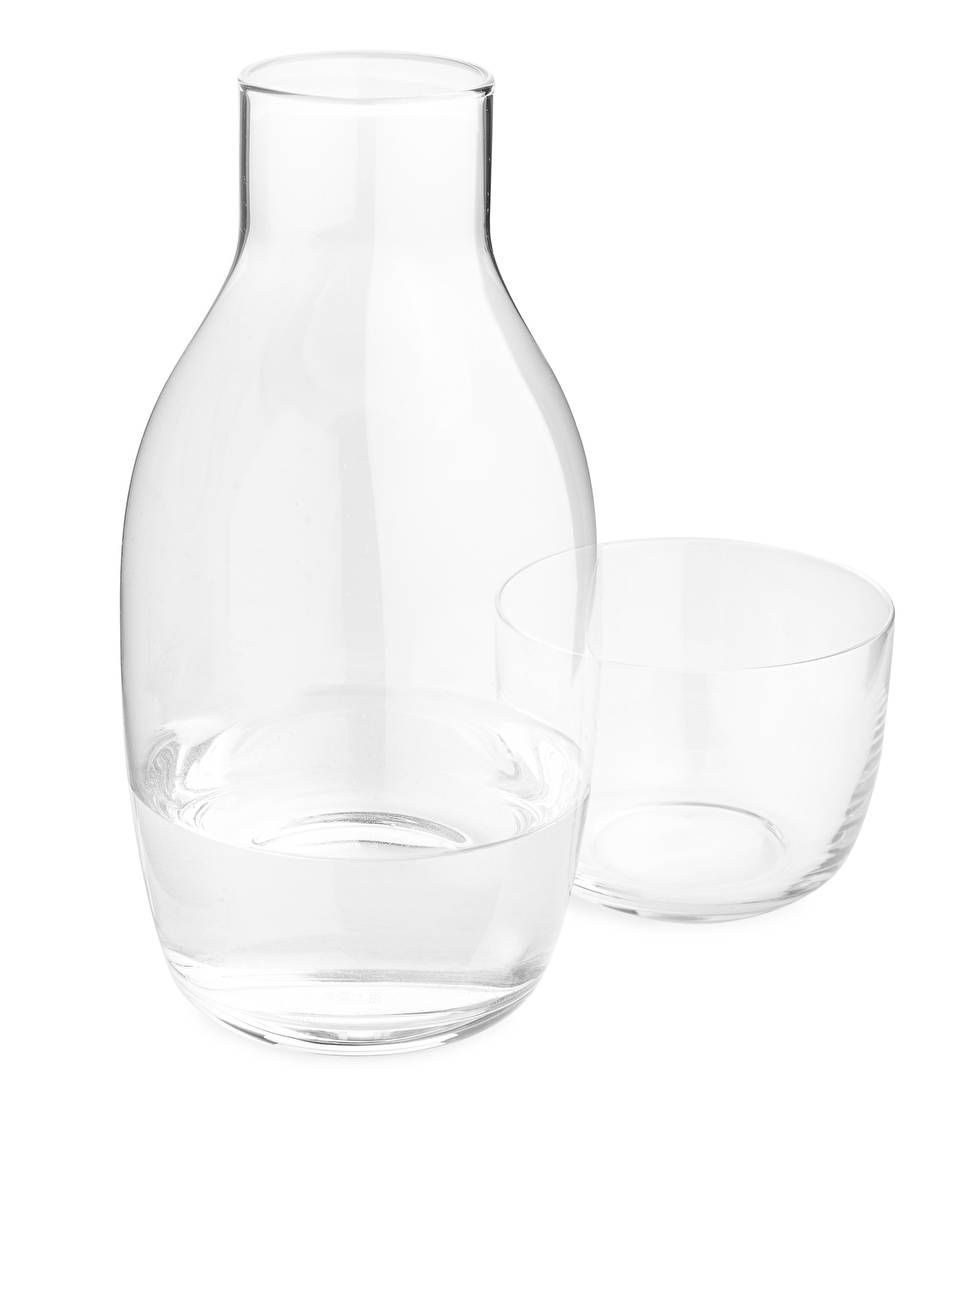 Serax Passe-Partout Carafe with Glass | ARKET